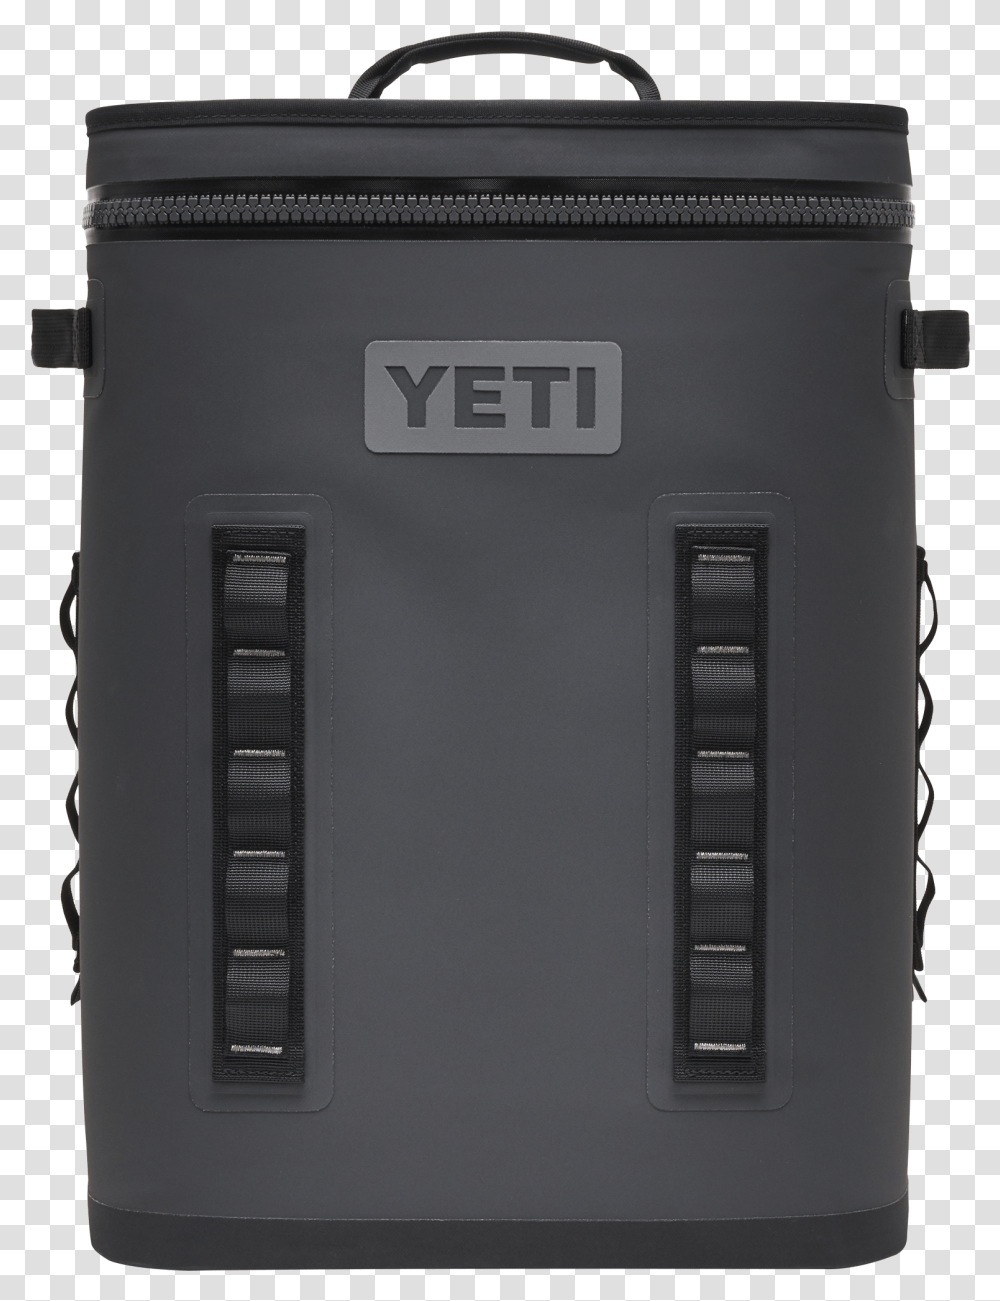 Backflip Yeti Backpack Cooler Charcoal, Electronics, LCD Screen, Monitor, Amplifier Transparent Png